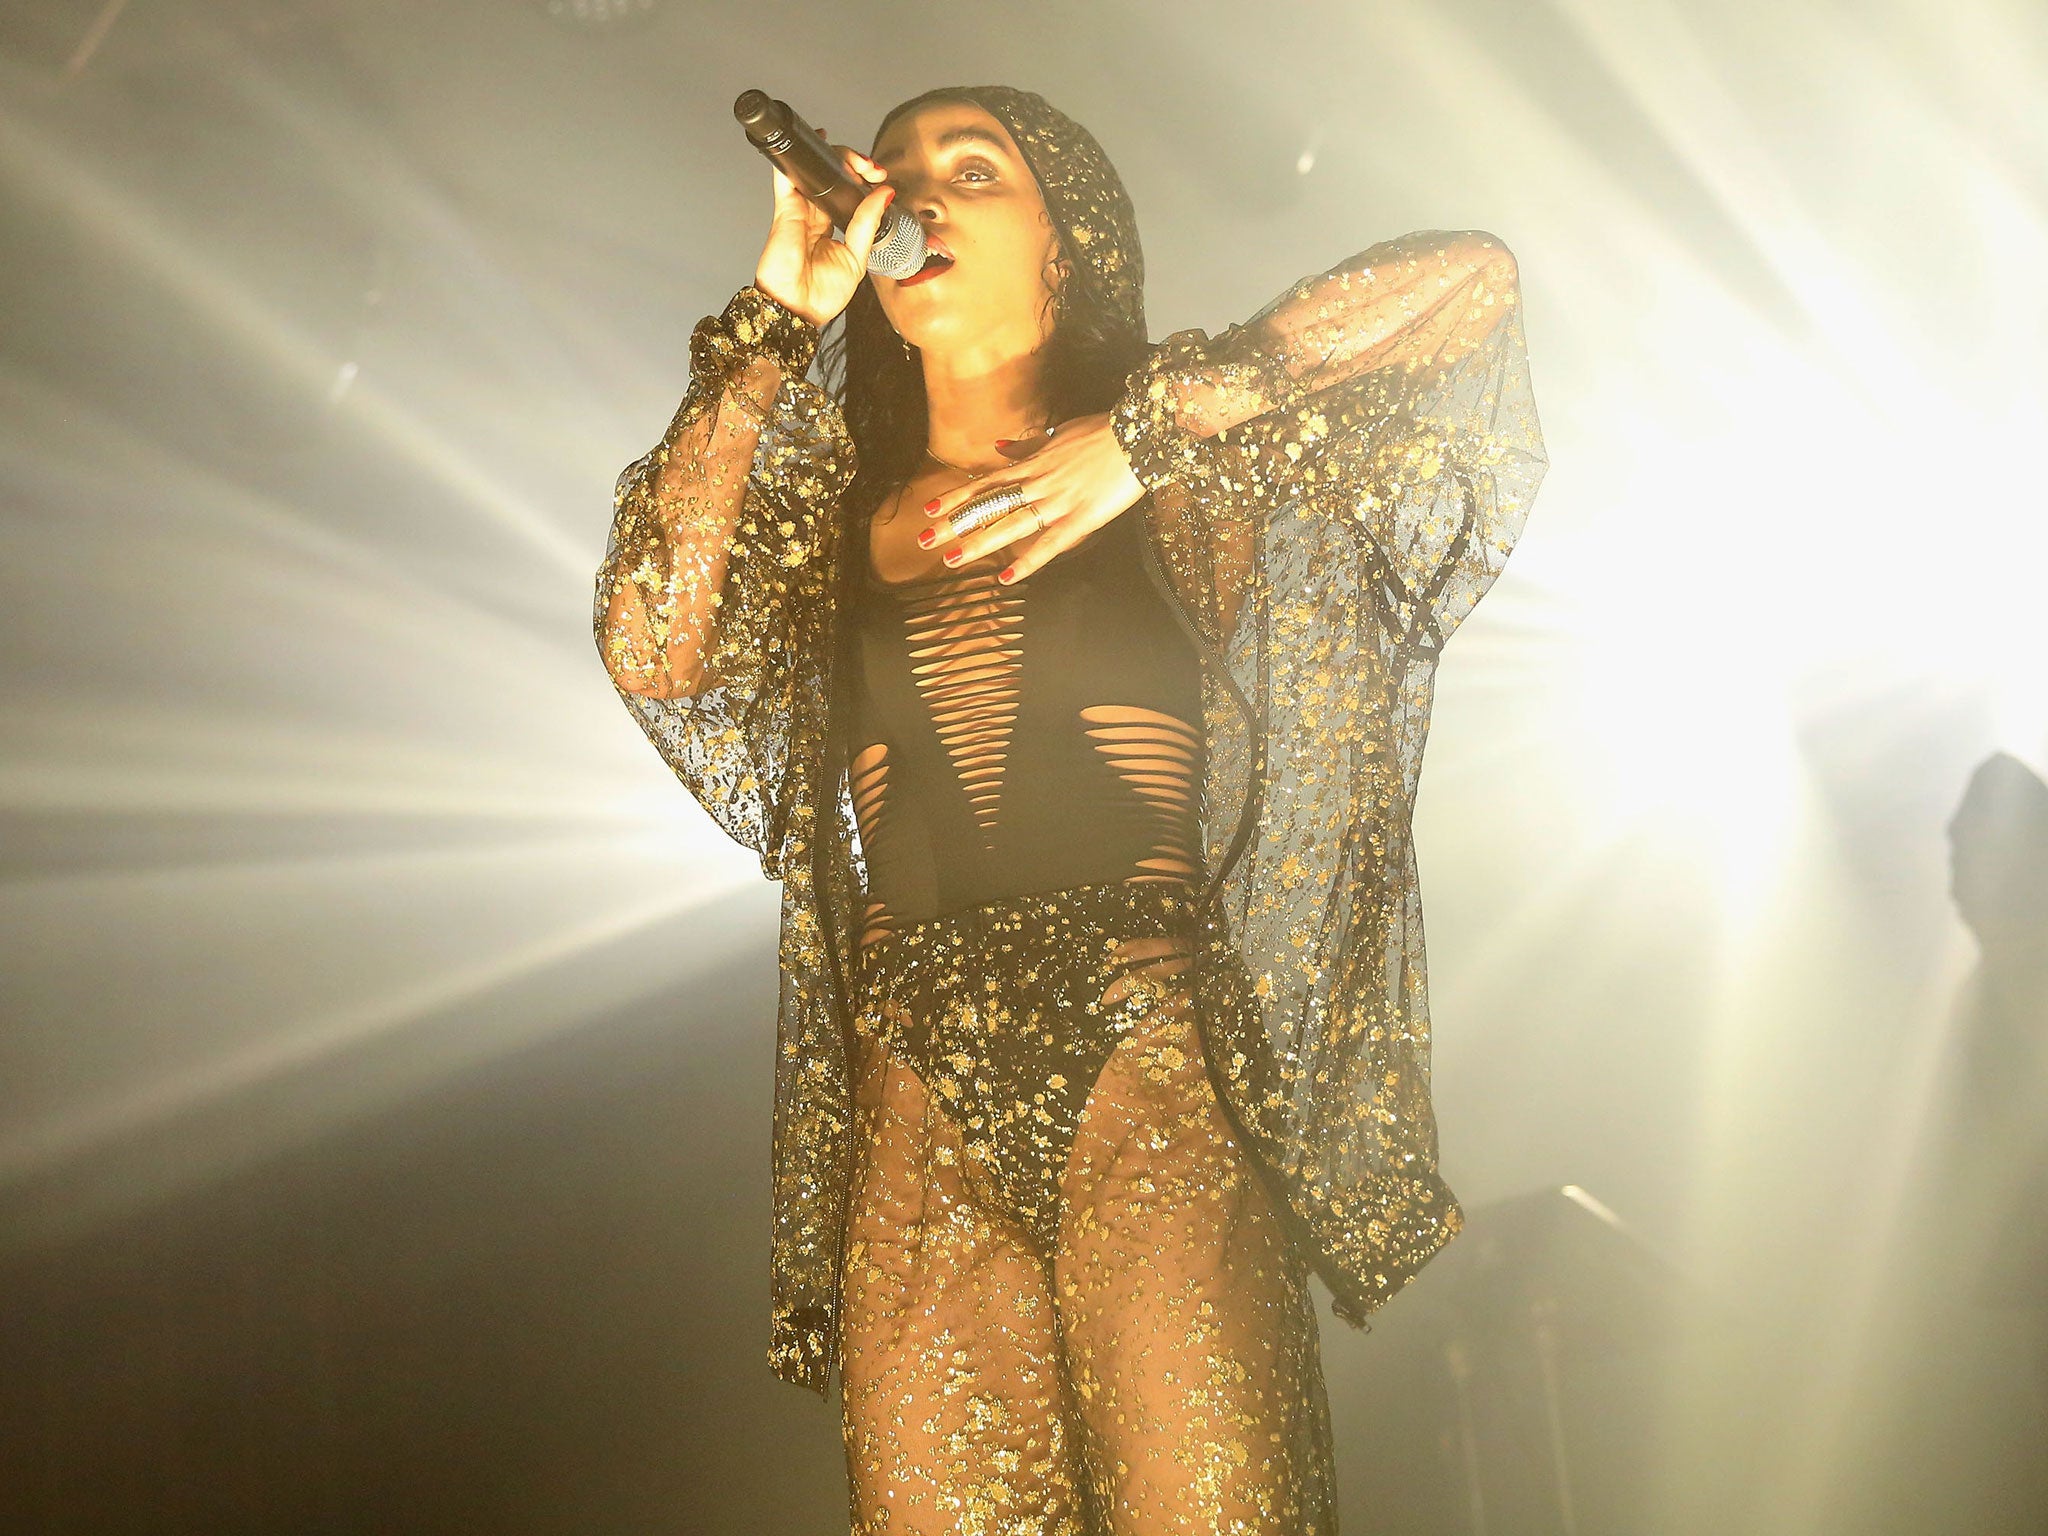 FKA Twigs performs on stage